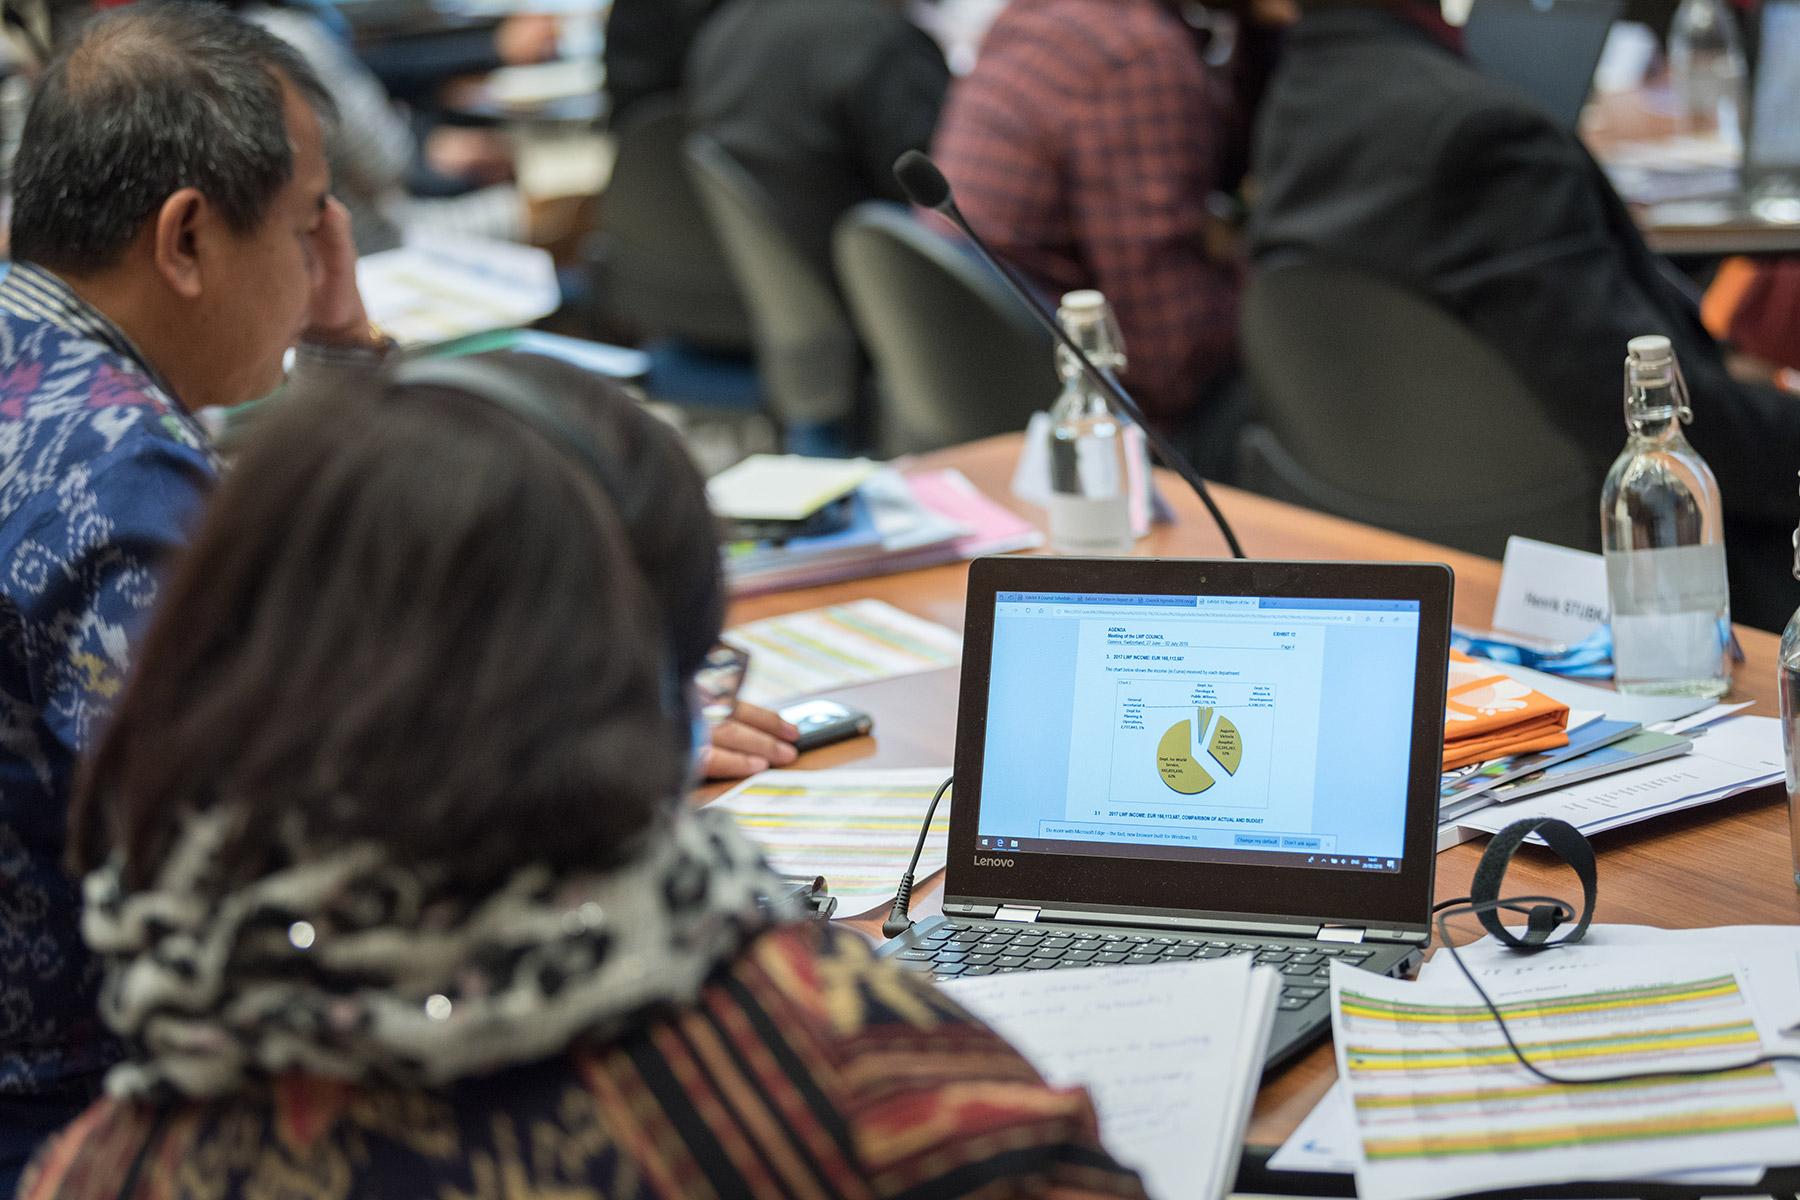 Members of the LWF Council follow the finance report during the 2018 meeting in Geneva. Photo: LWF/Albin Hillert